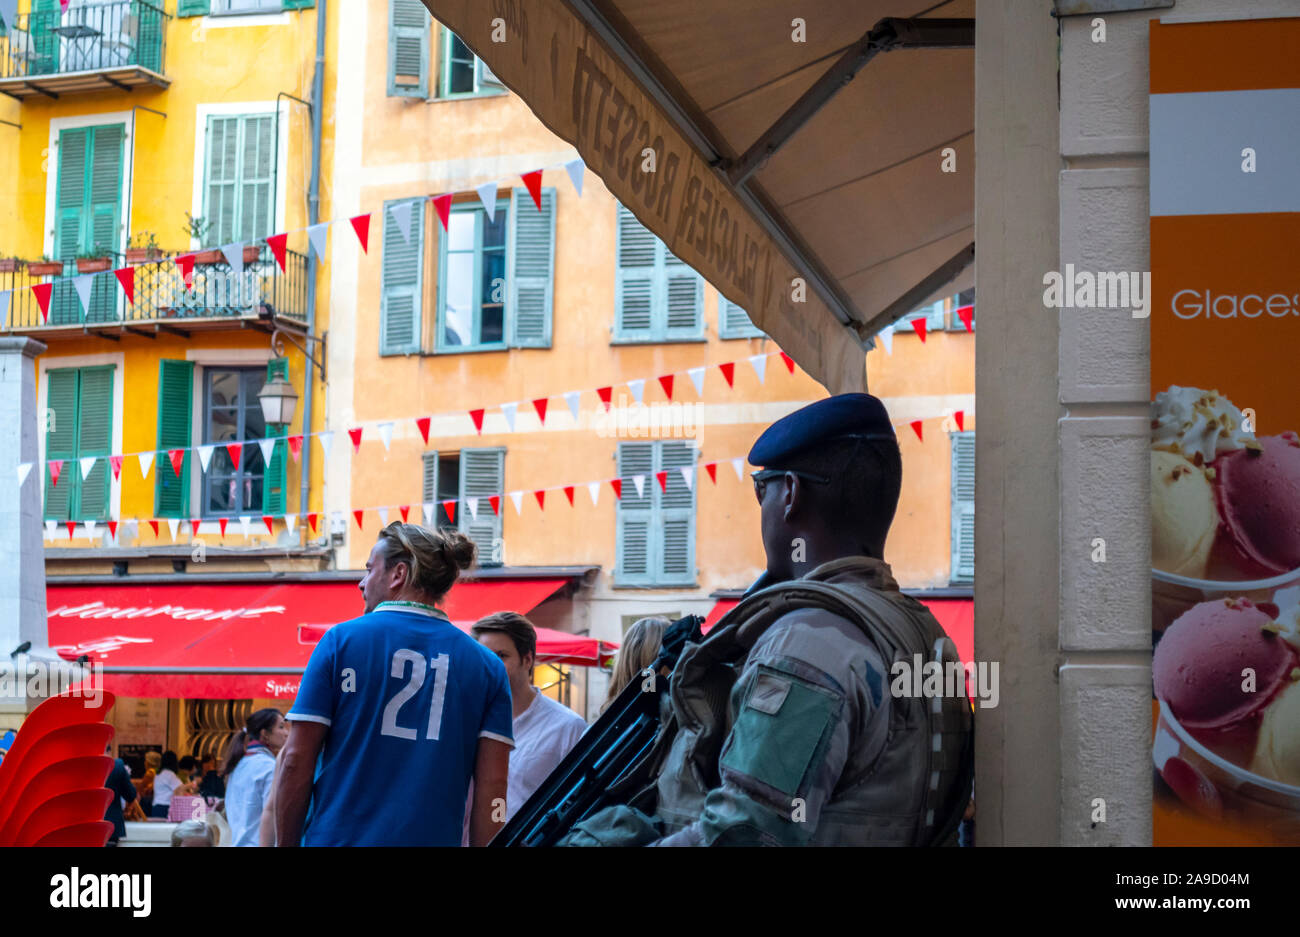 A young black French army officer with a beret and automatic rifle stands guard inside city center in Nice, France. Stock Photo